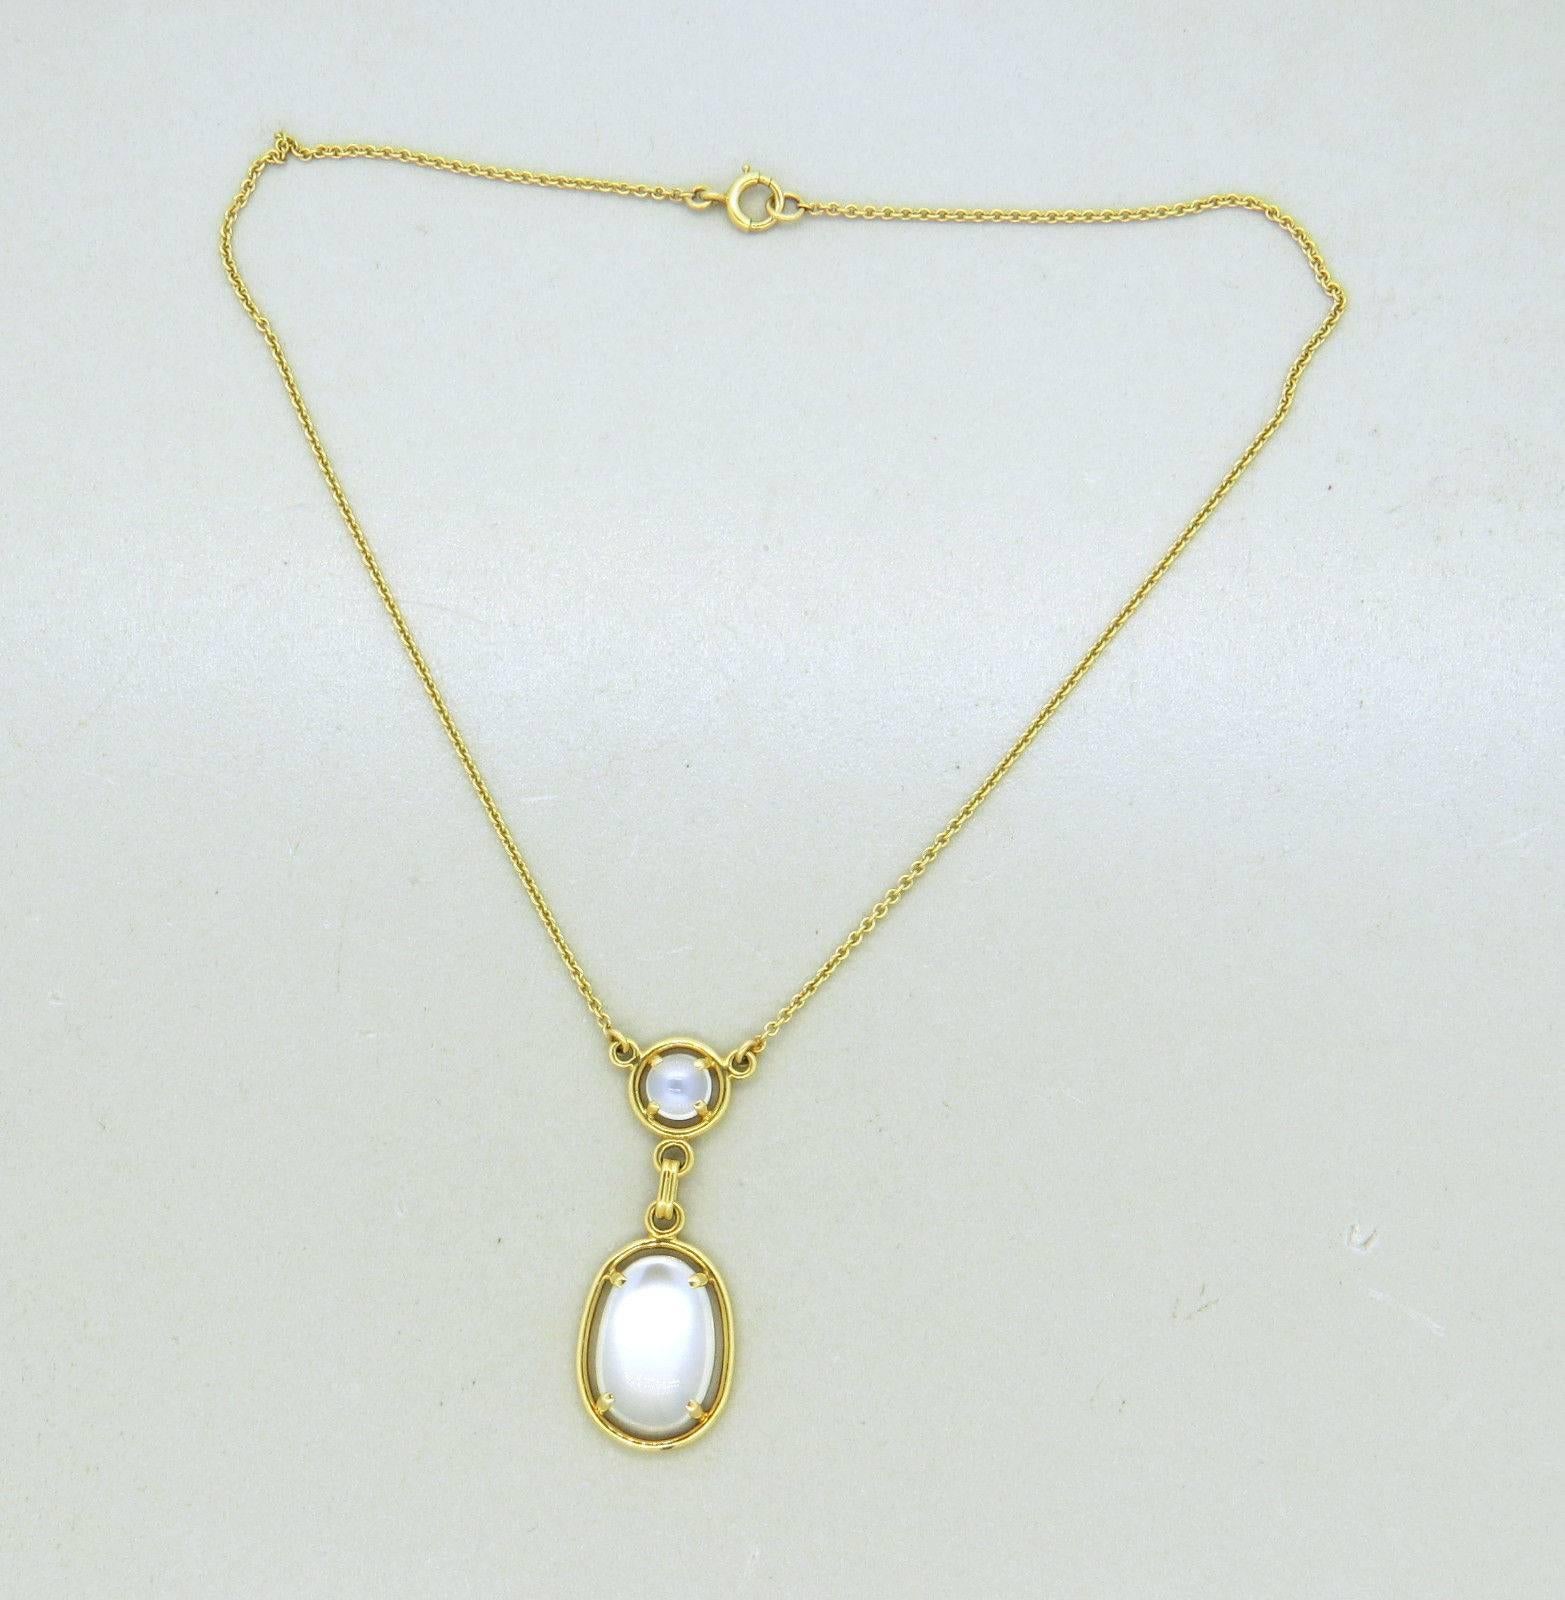 A 14k yellow gold necklace set with Moonstones. The necklace is 13 3/4